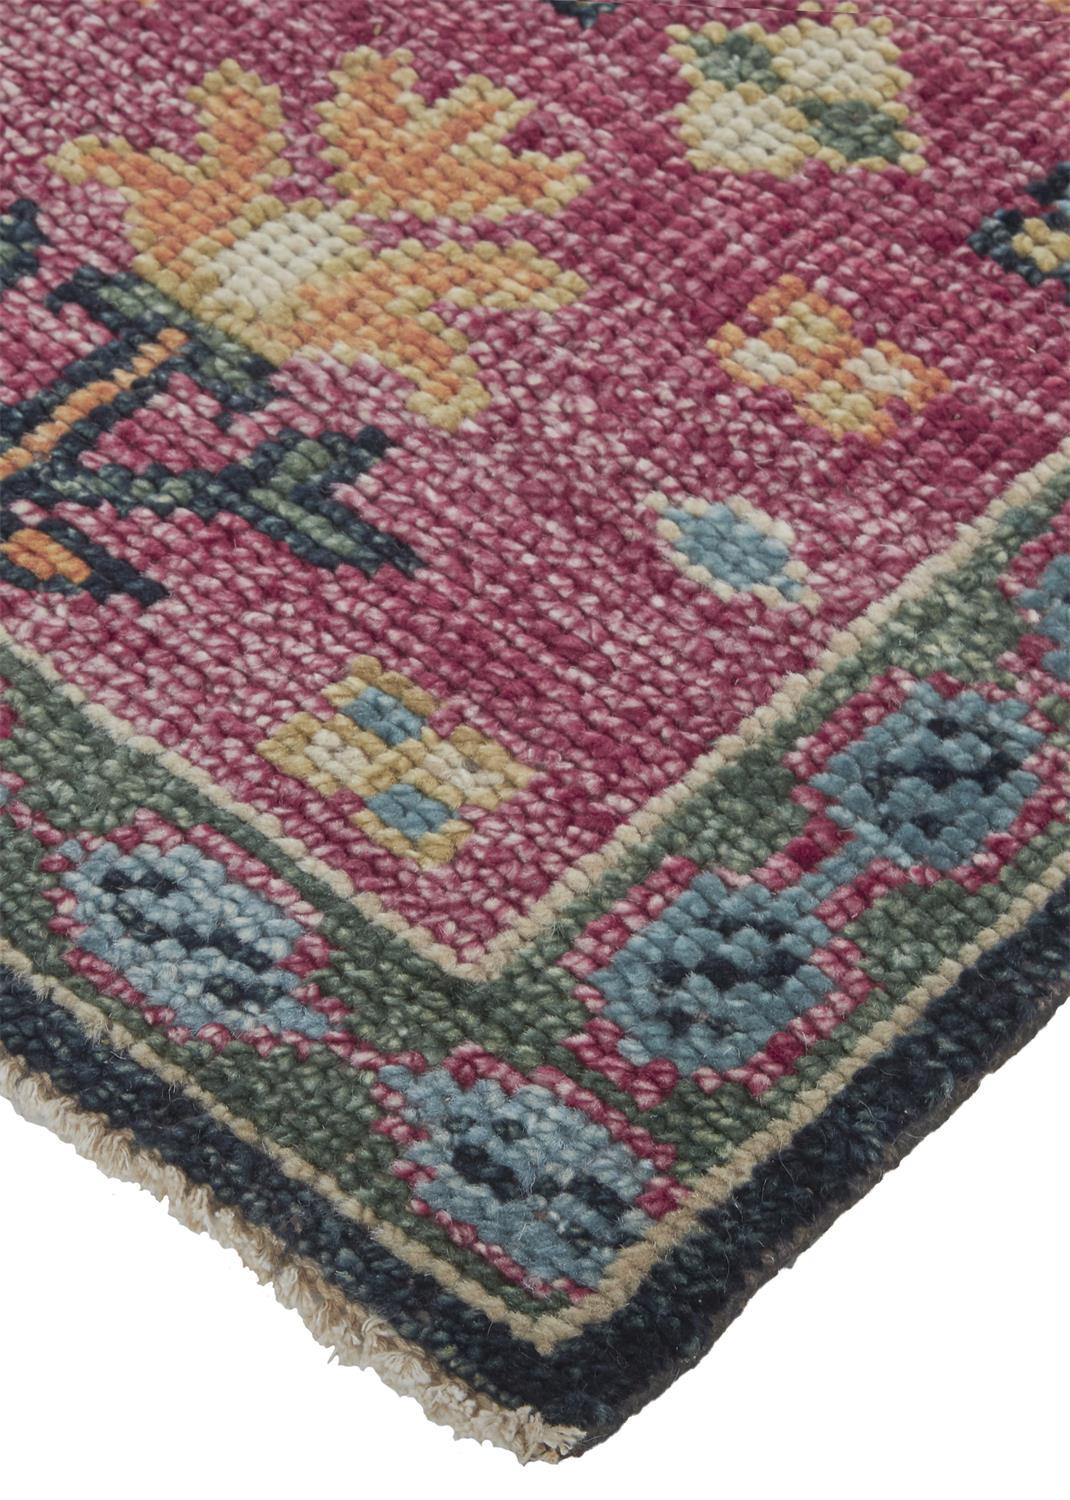 Feizy Feizy Piraj Nordic Hand Knot Wool Rug - Available in 7 Sizes - Carmine Pink & Indigo